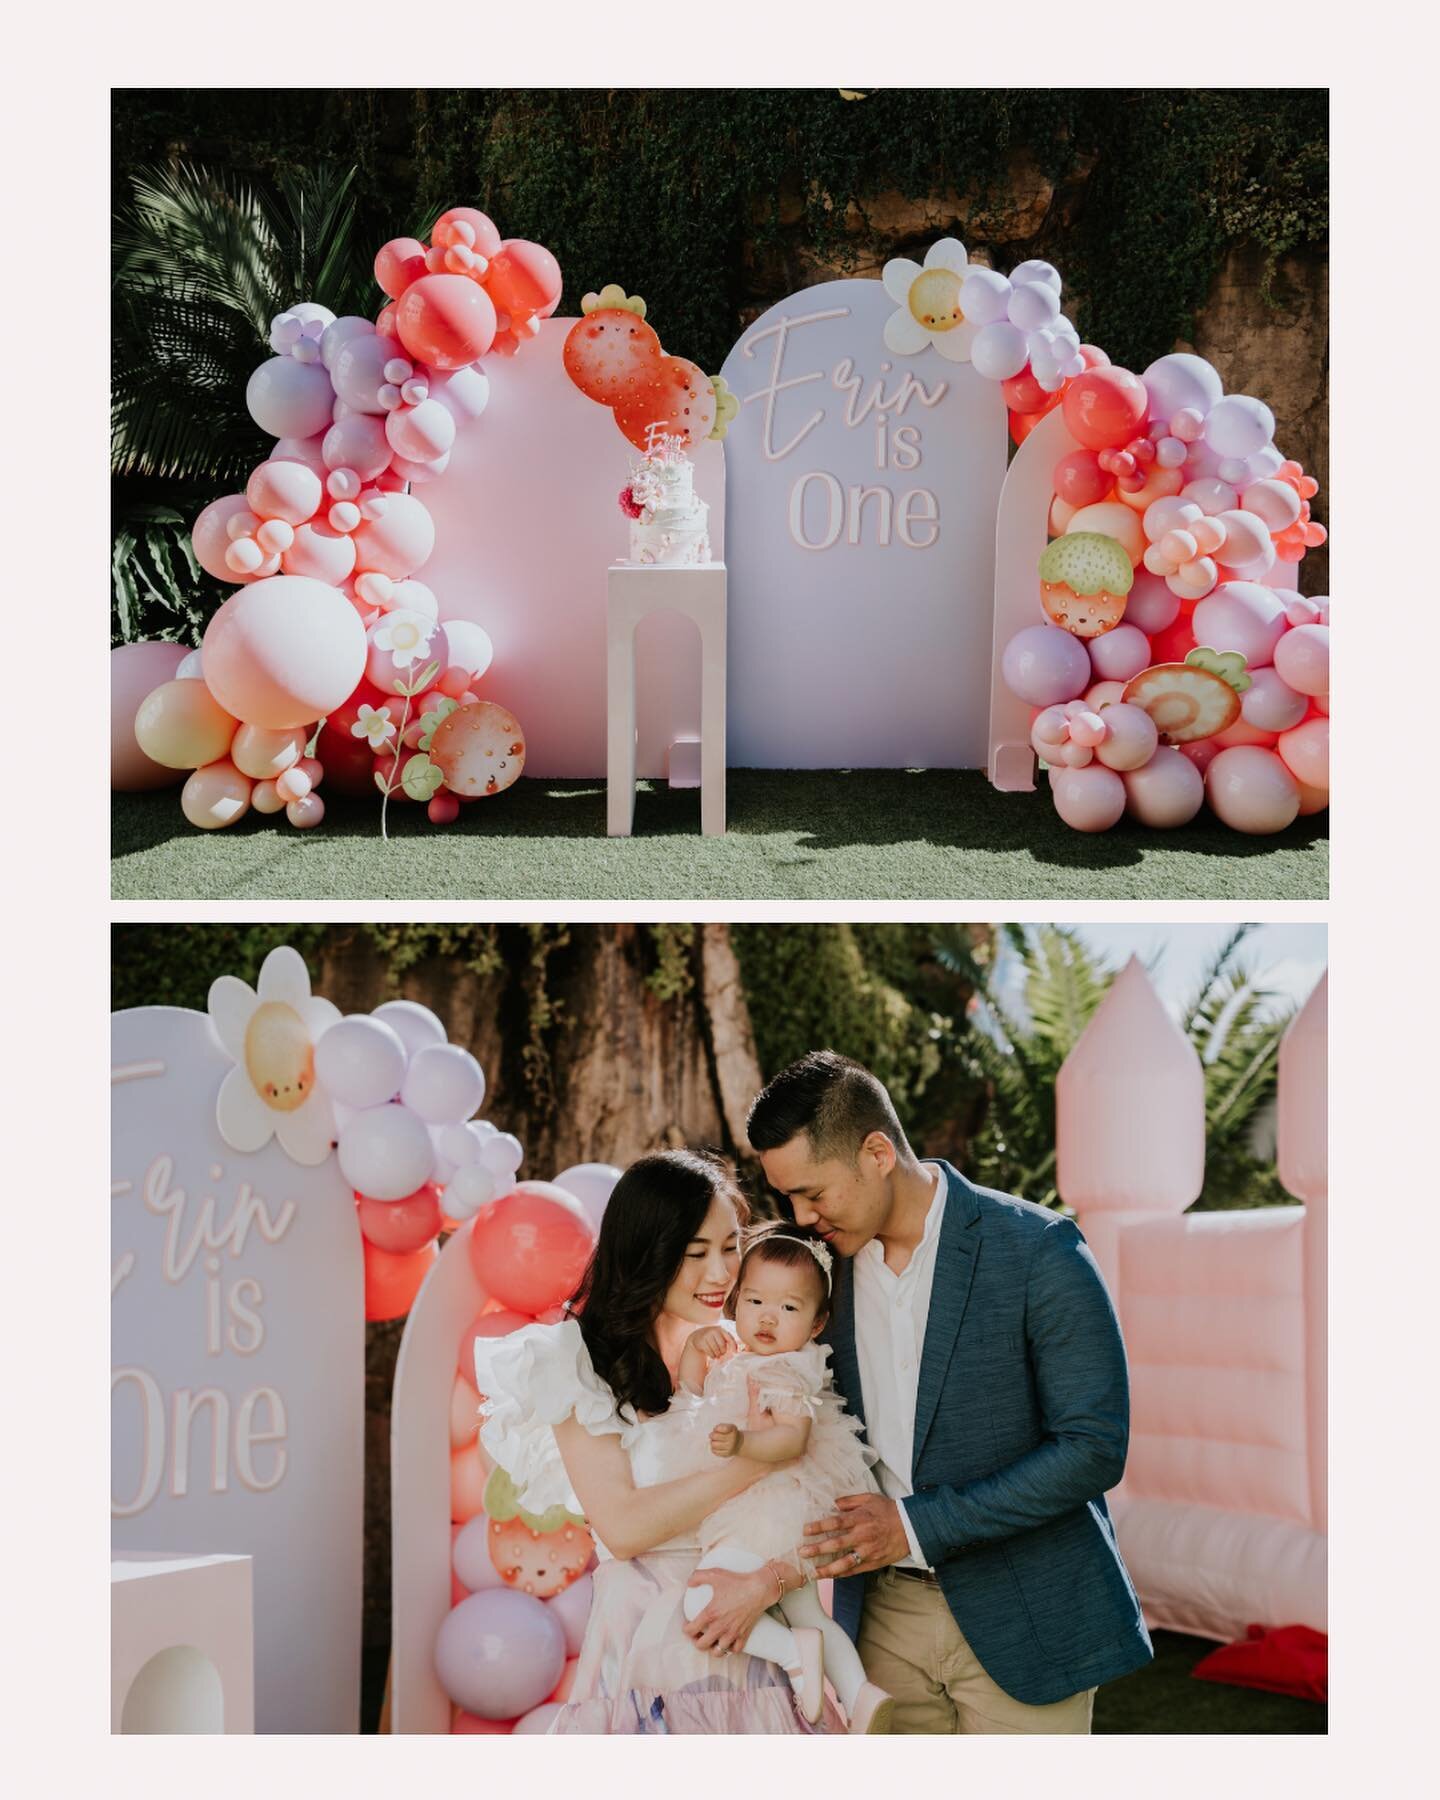 🍓 A &quot;berry&quot; special first birthday celebration at he exquisite @thelussh ! 🍓

🌟 From berry-licious decorations to the velvety vibes, every detail impressed me beyond words. Sweetness at its finest!

🌿Feeling so grateful for the chance t